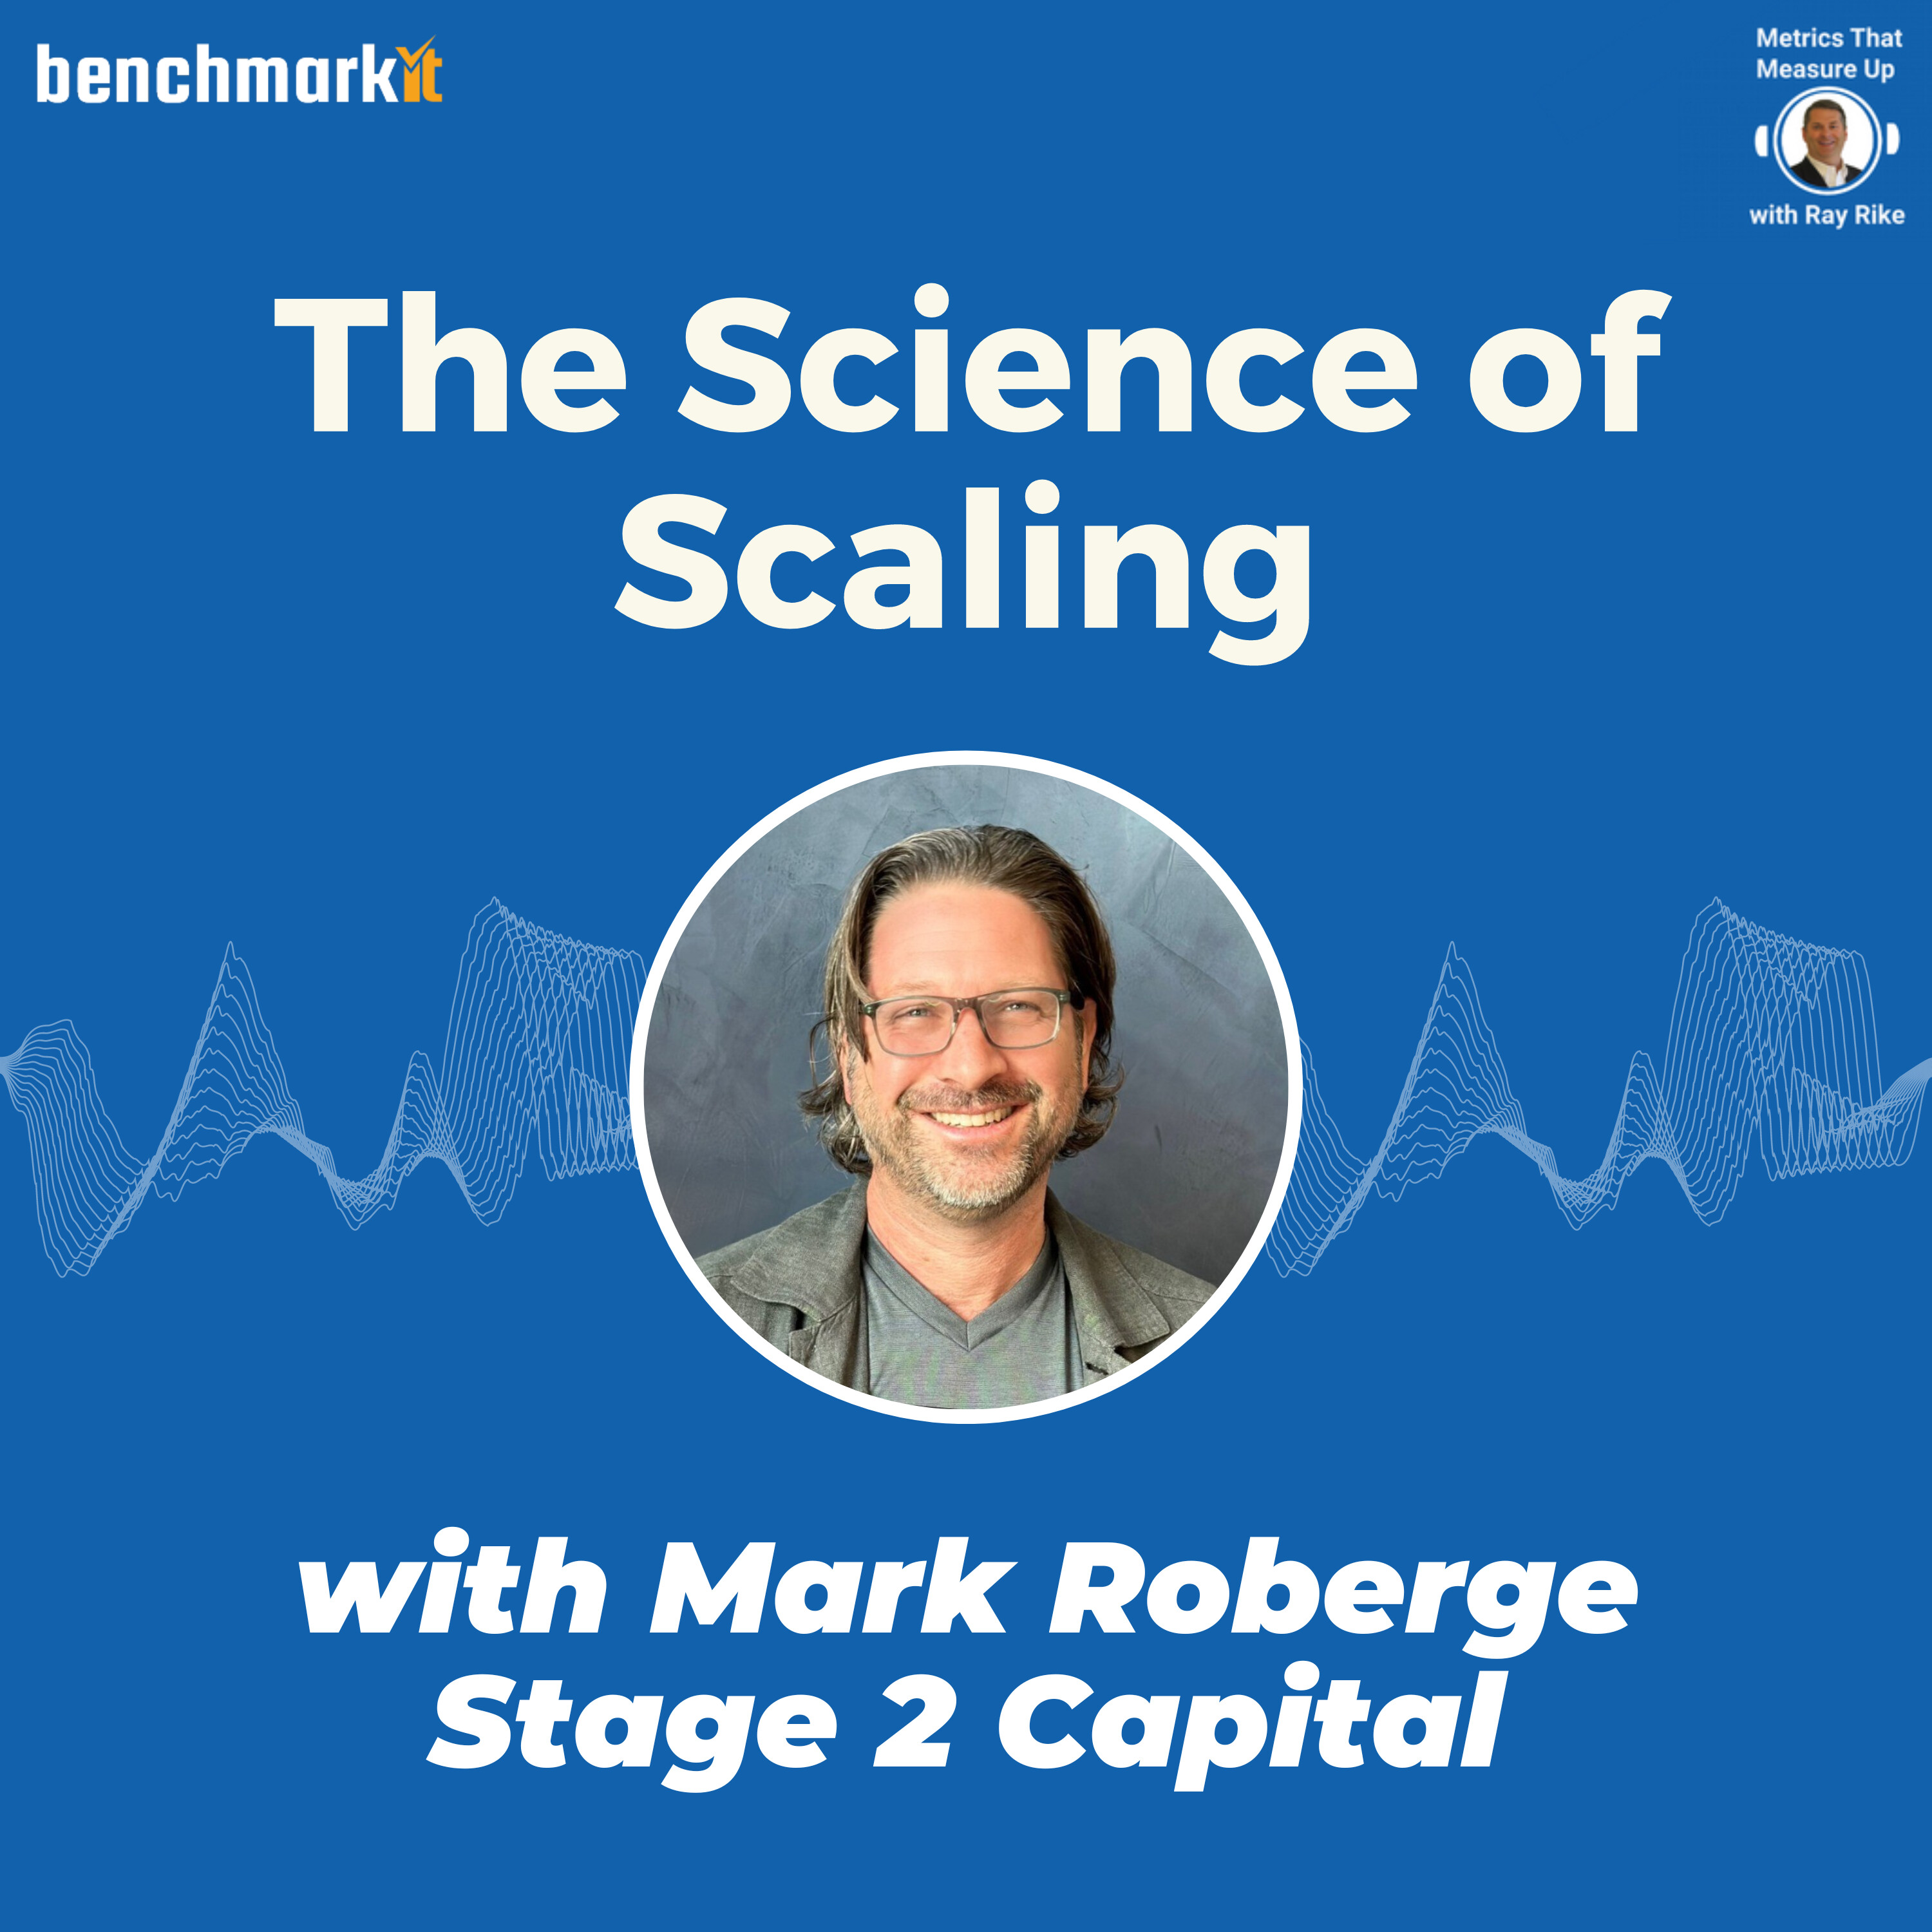 The Science of Scaling - with Mark Roberge, Stage 2 Capital